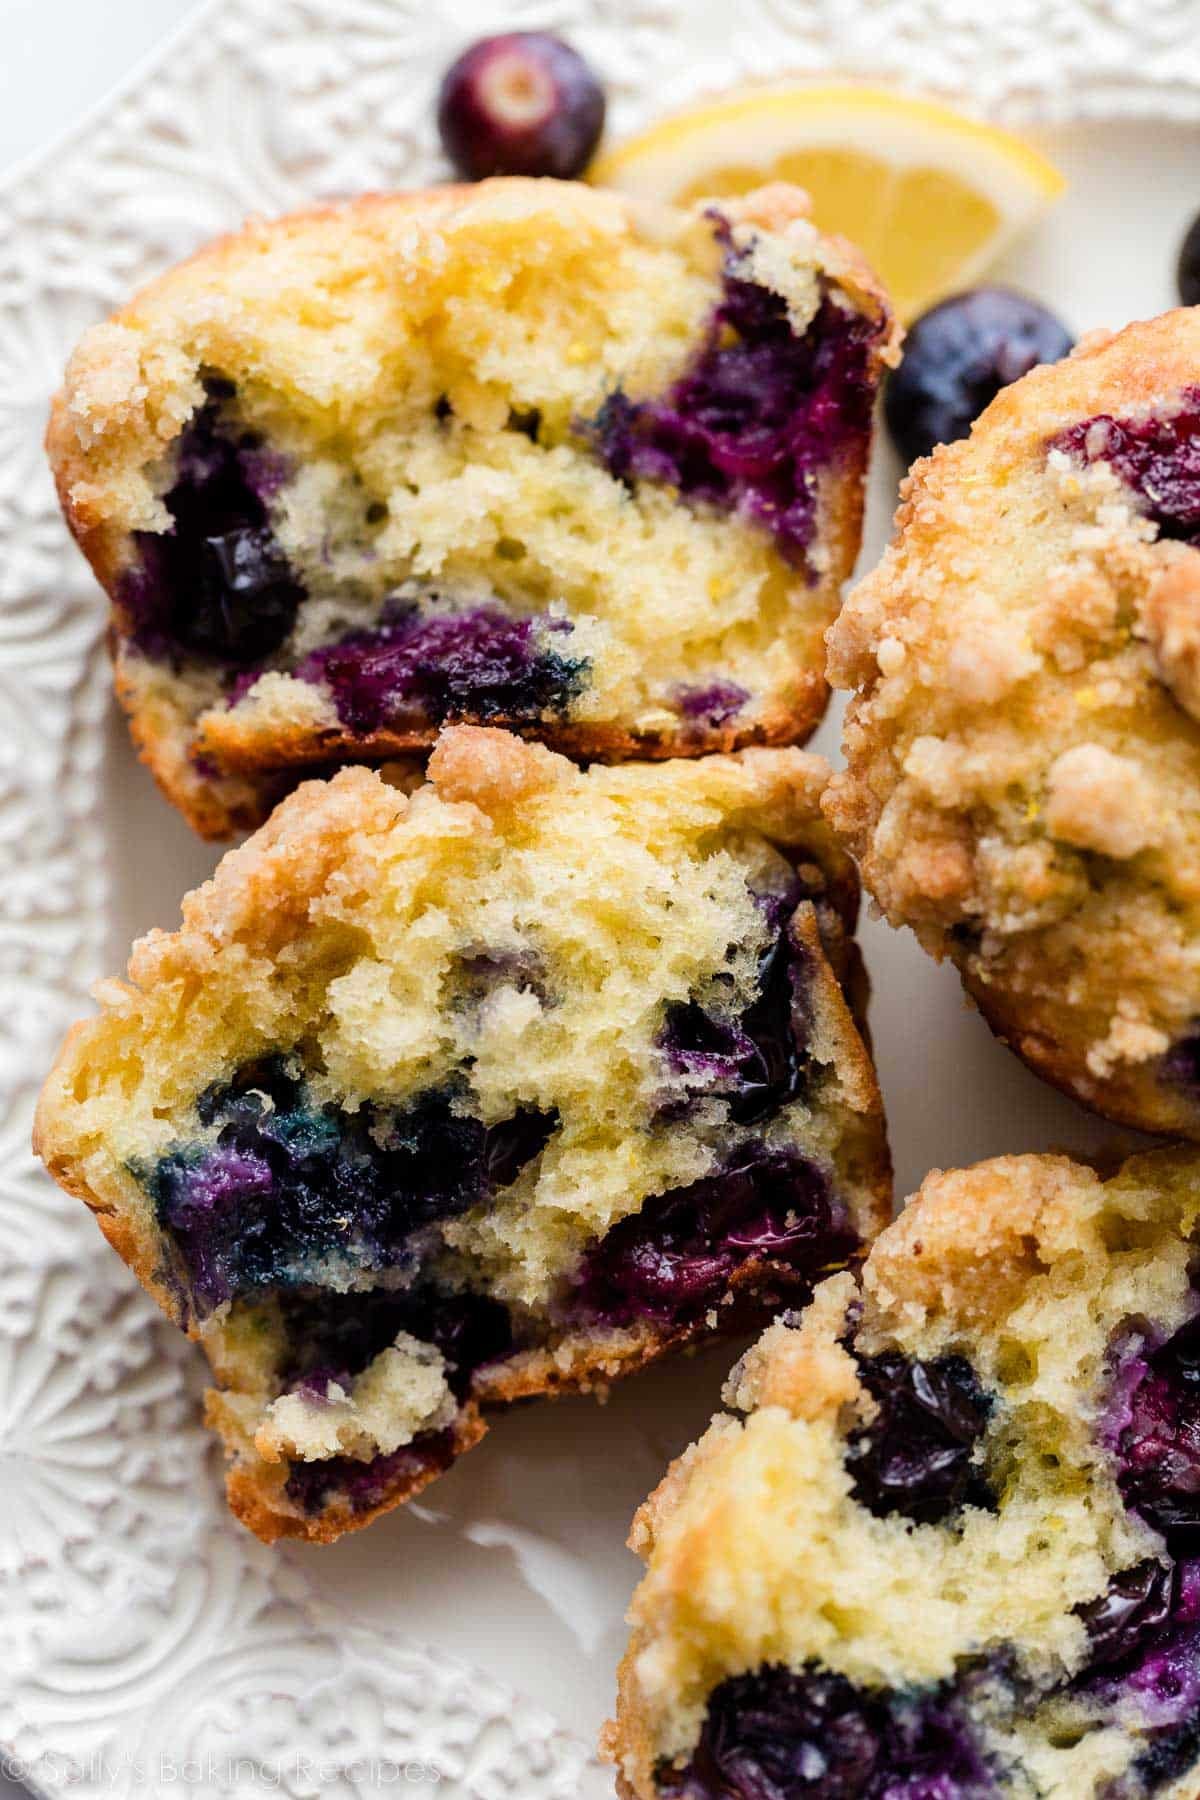 lemon blueberry muffin cut in half to show blueberries in center.